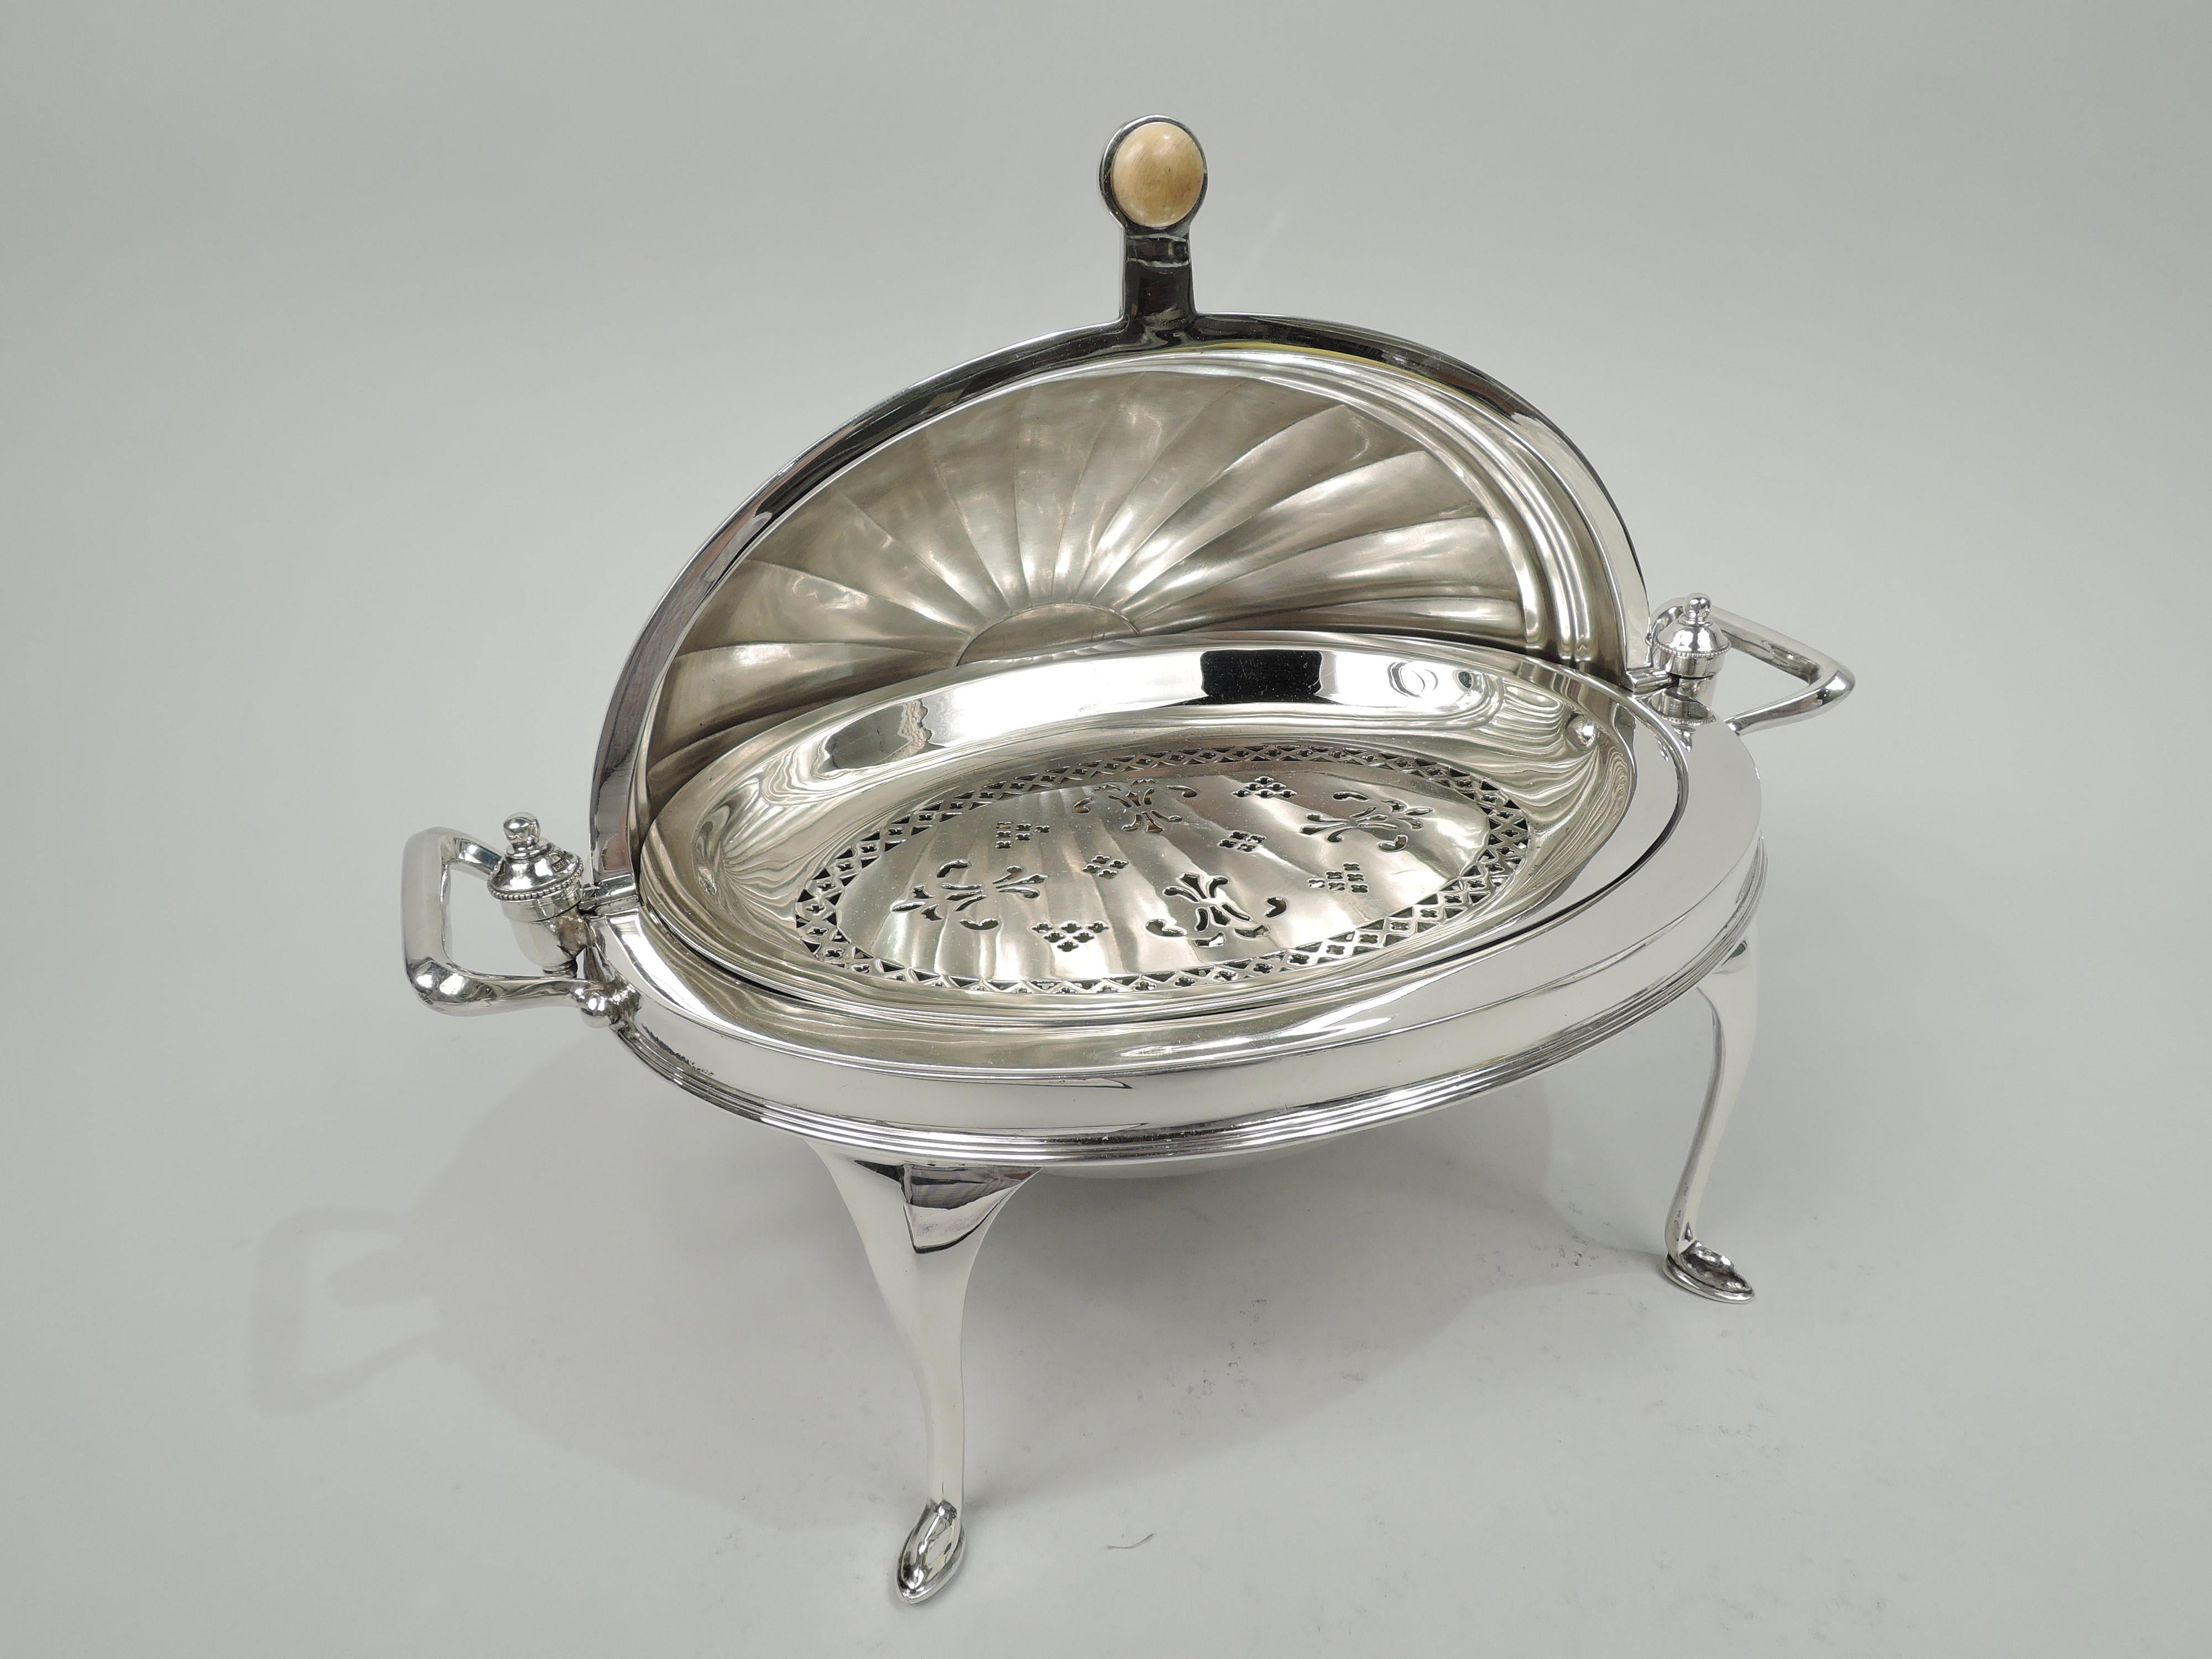 Neoclassical Revival English Classical Sterling Silver Bun Warmer For Sale